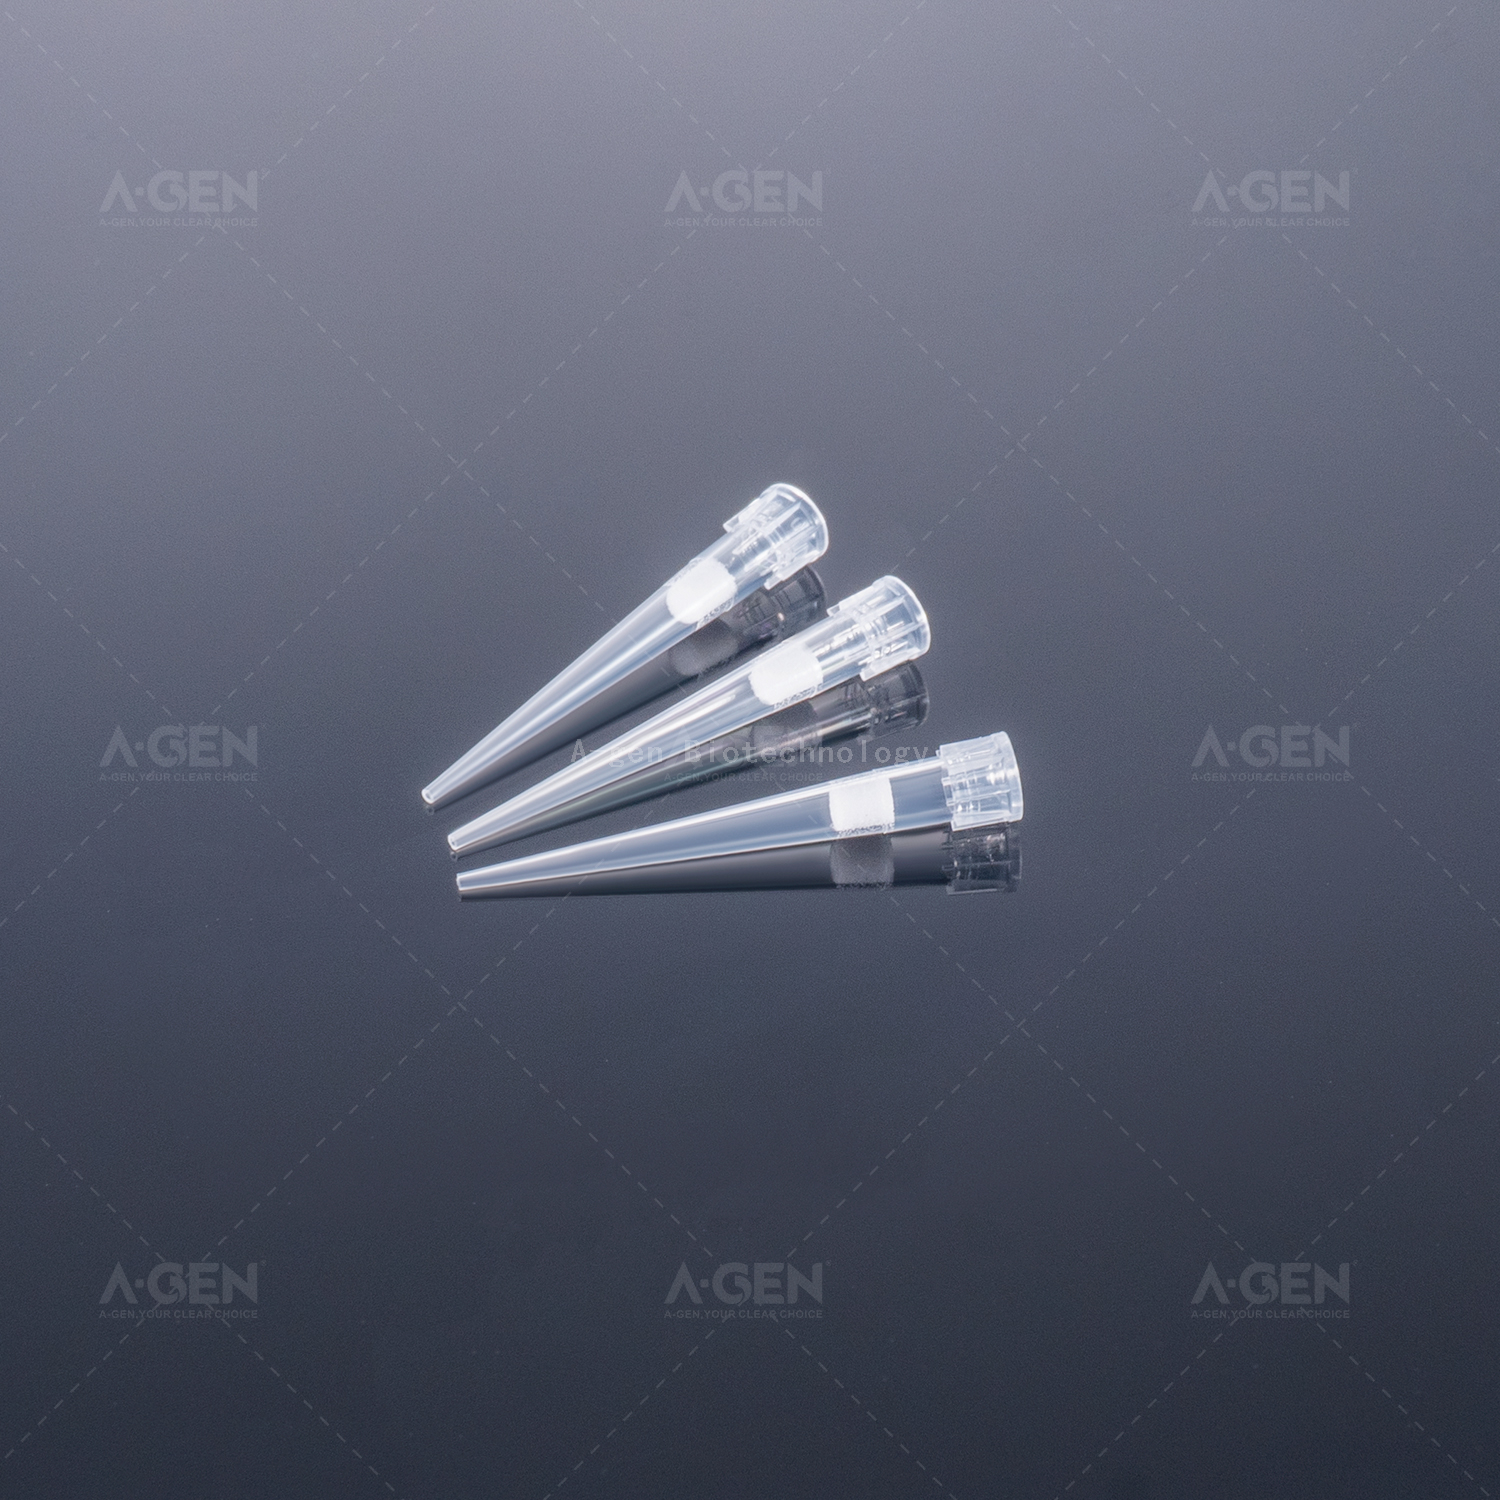 Agilent 30μL 384 well Transparent Pipette Tip (Racked,sterilized) for Liquid Transfer VT384-30-RSL Low Residual No Filter